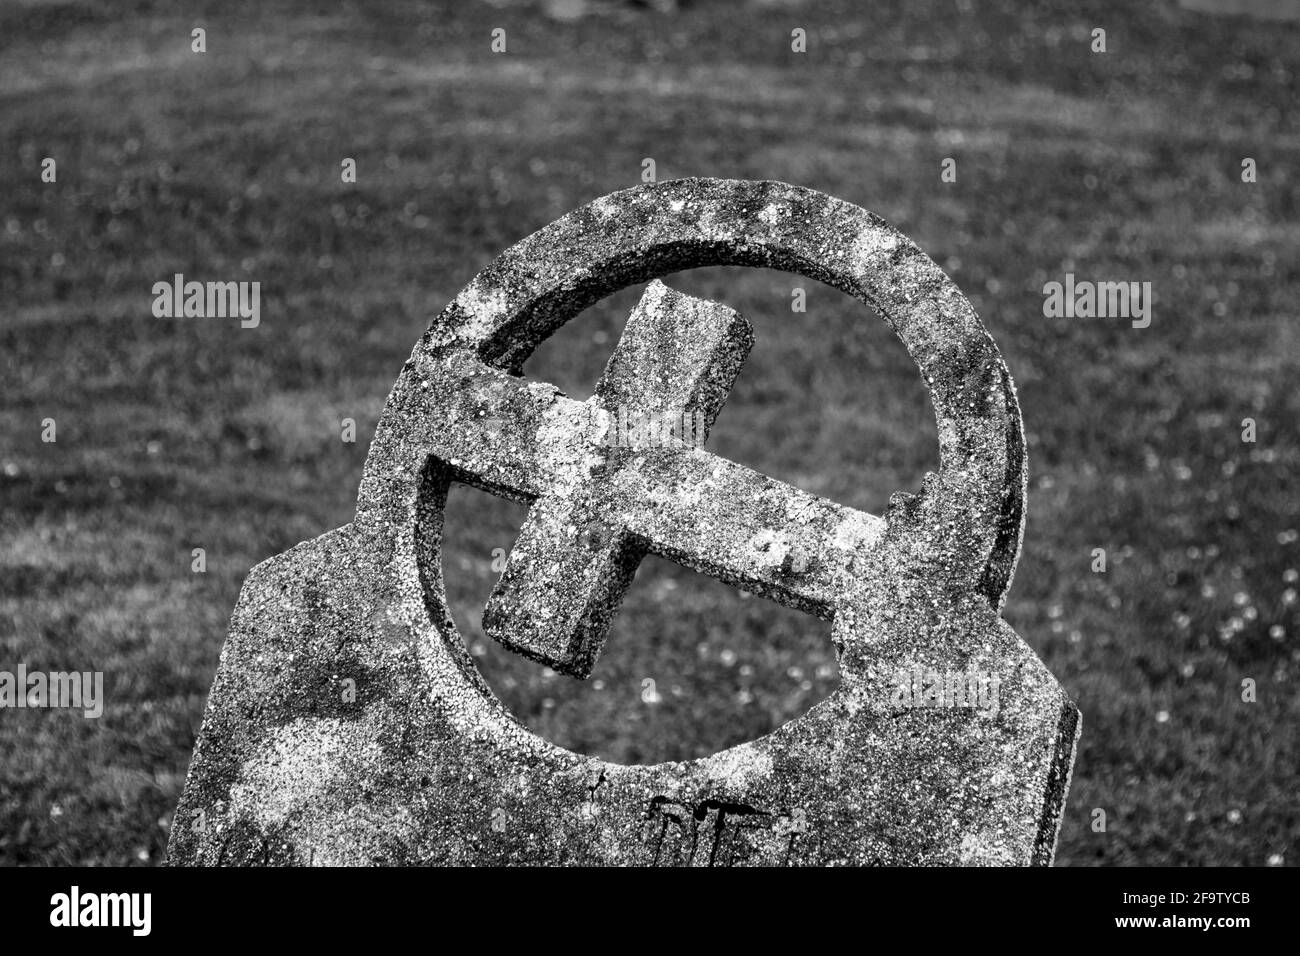 Stone grave with an angled cross inside a hollow circle - grass in the background Stock Photo